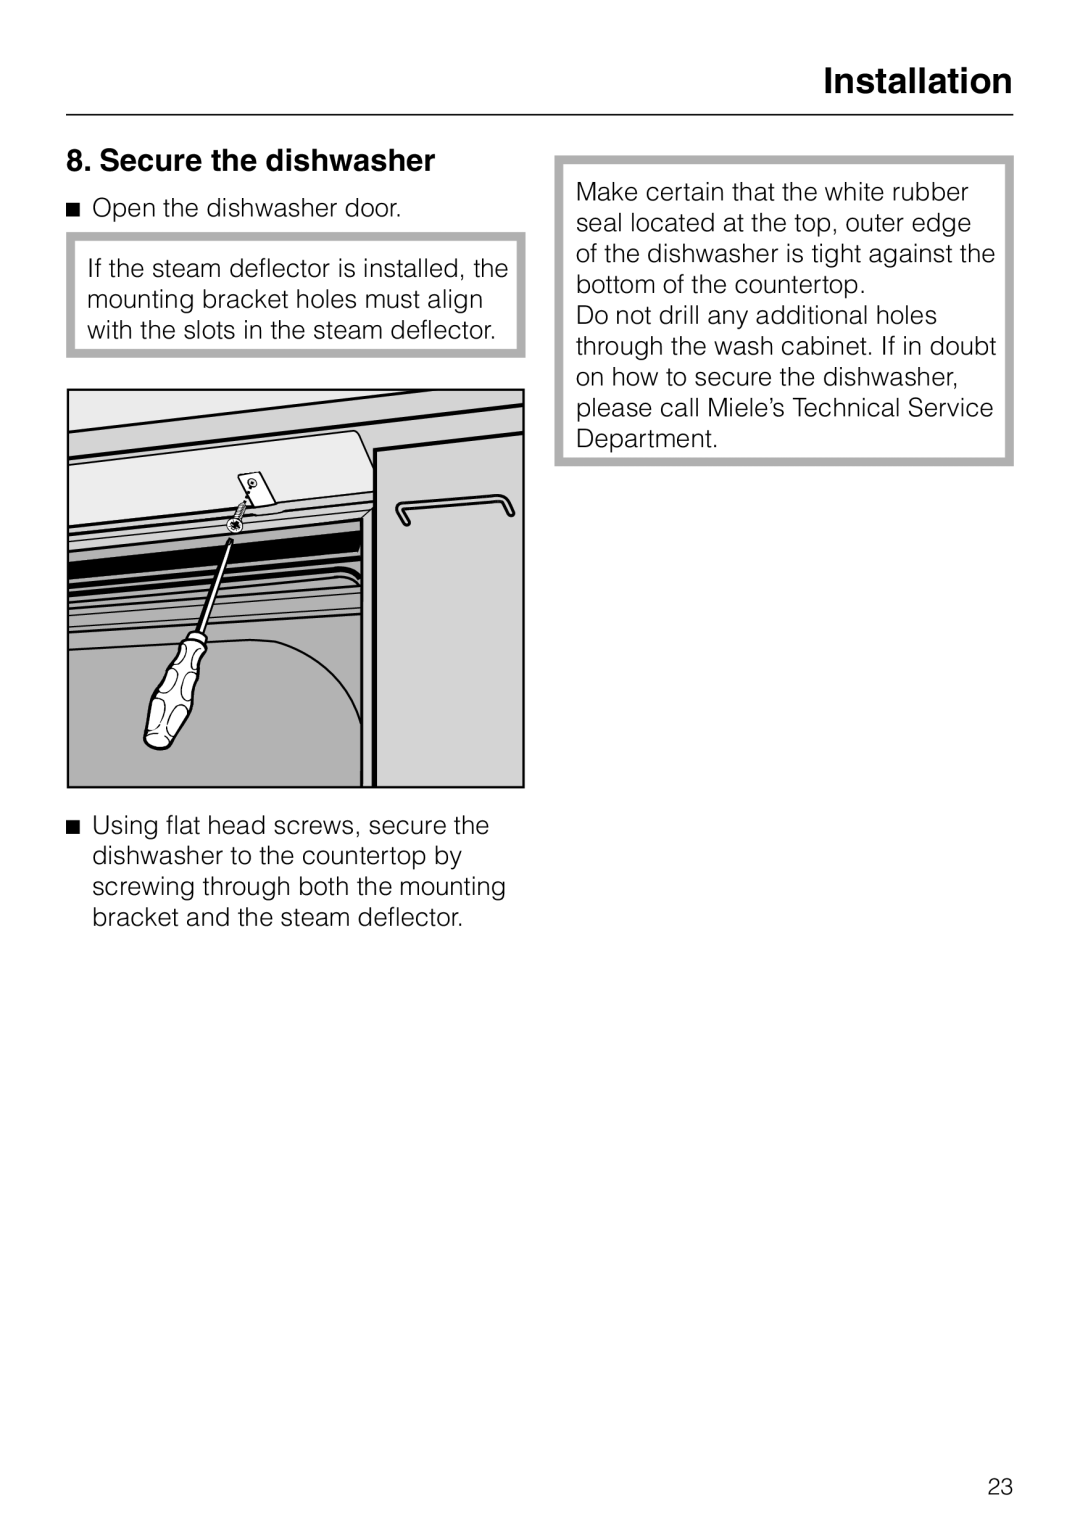 Miele HG01 installation instructions Secure the dishwasher, Installation 